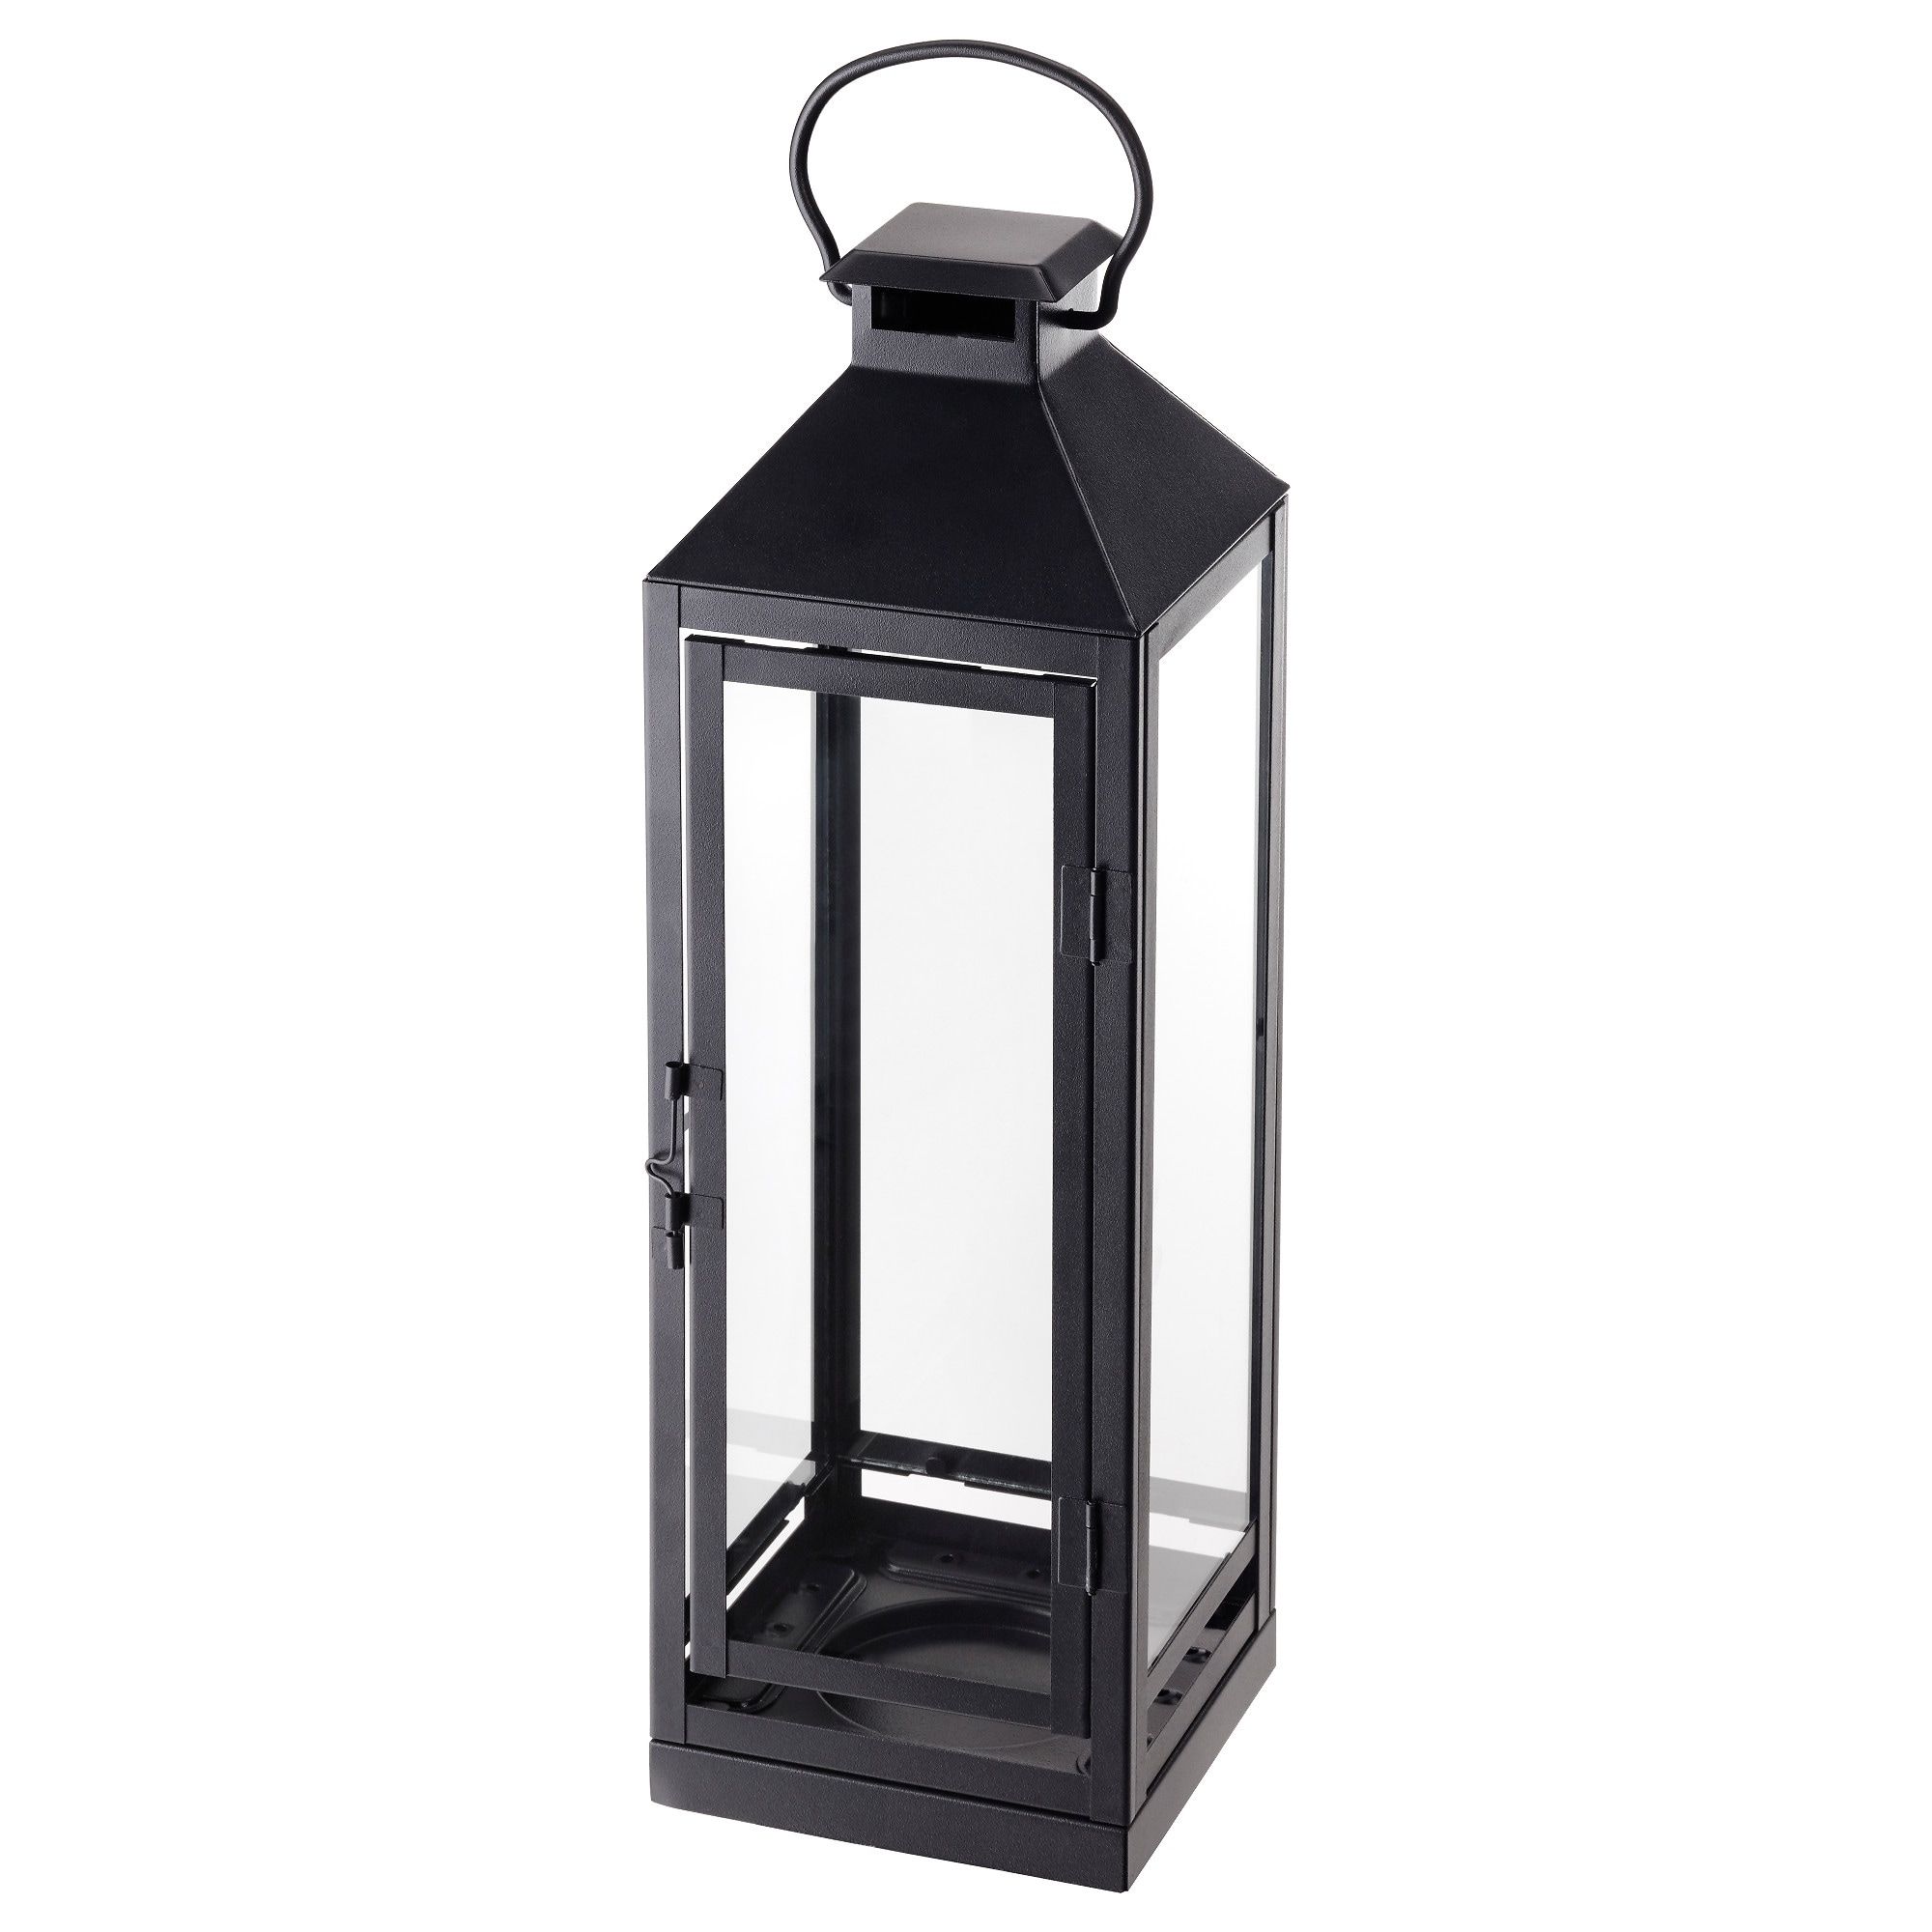 Lanterns & Candle Lanterns – Ikea Intended For Outdoor Glass Lanterns (View 9 of 20)